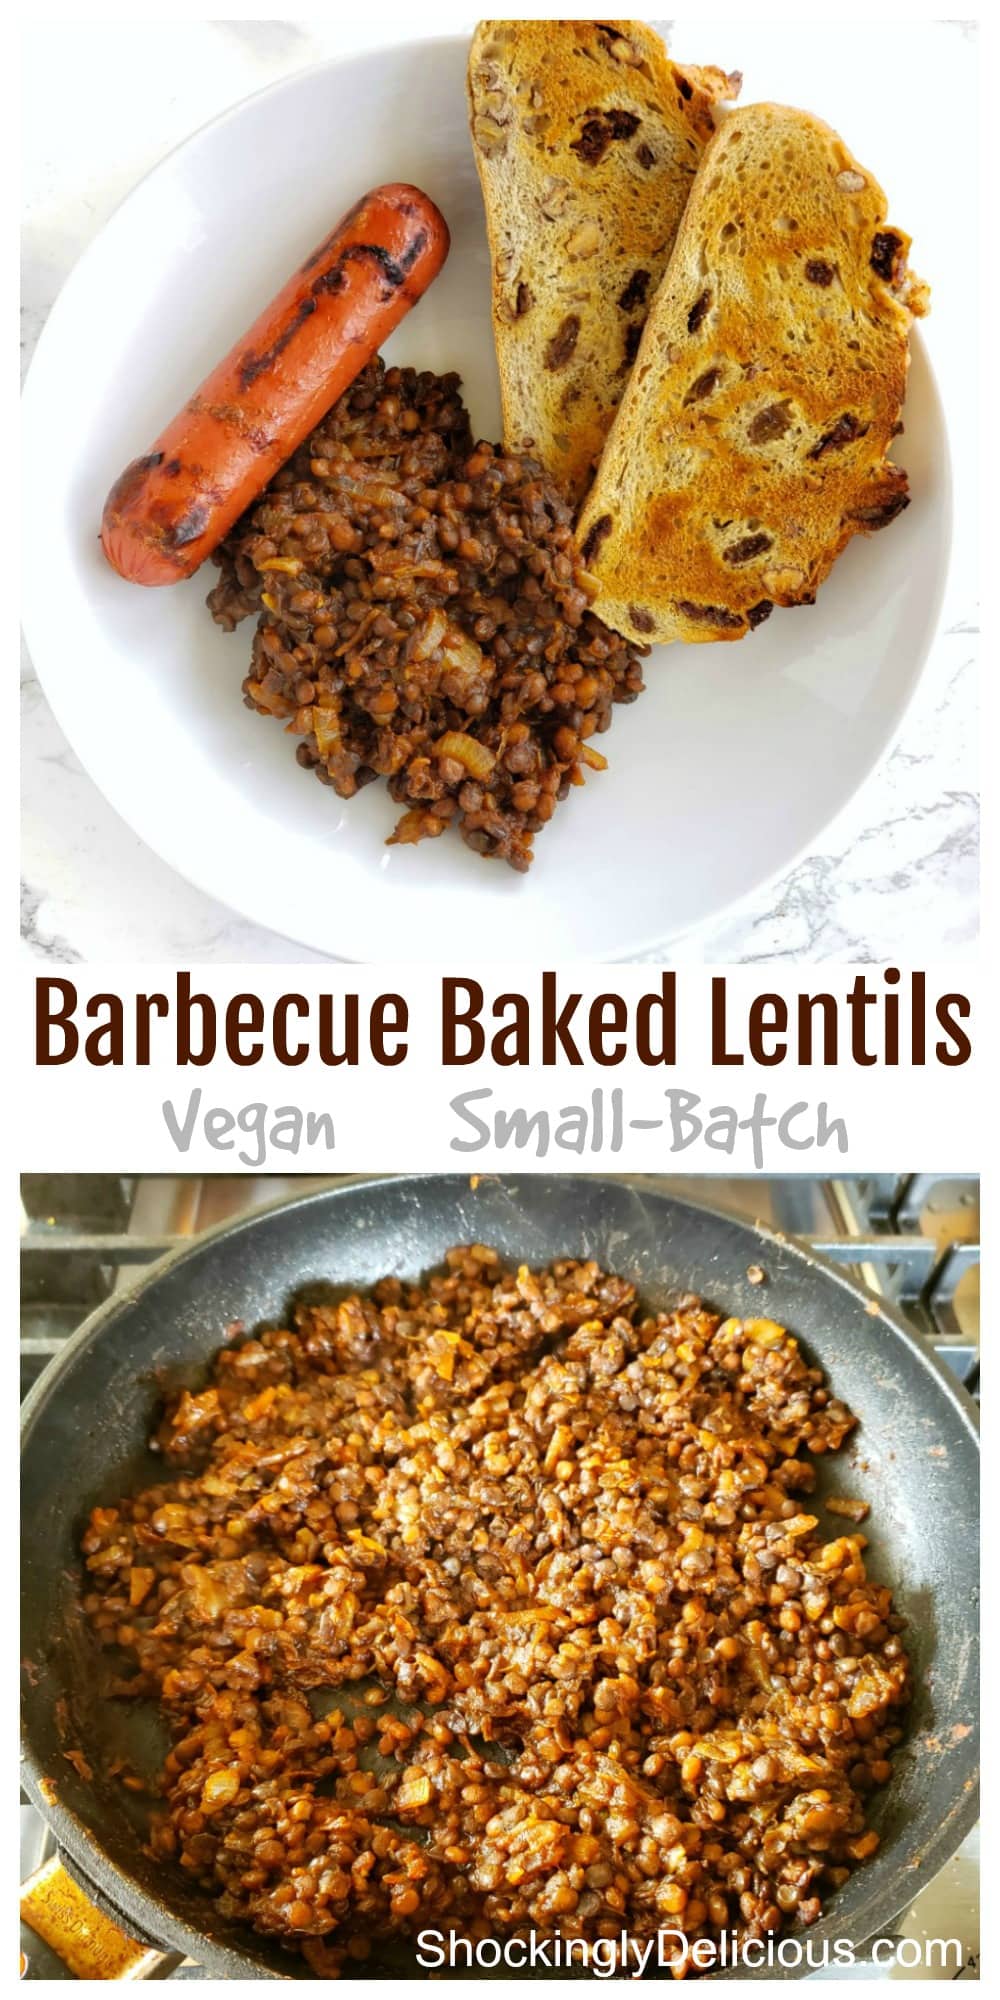 Barbecue Baked Lentils recipe photo collage on ShockinglyDelicious.com